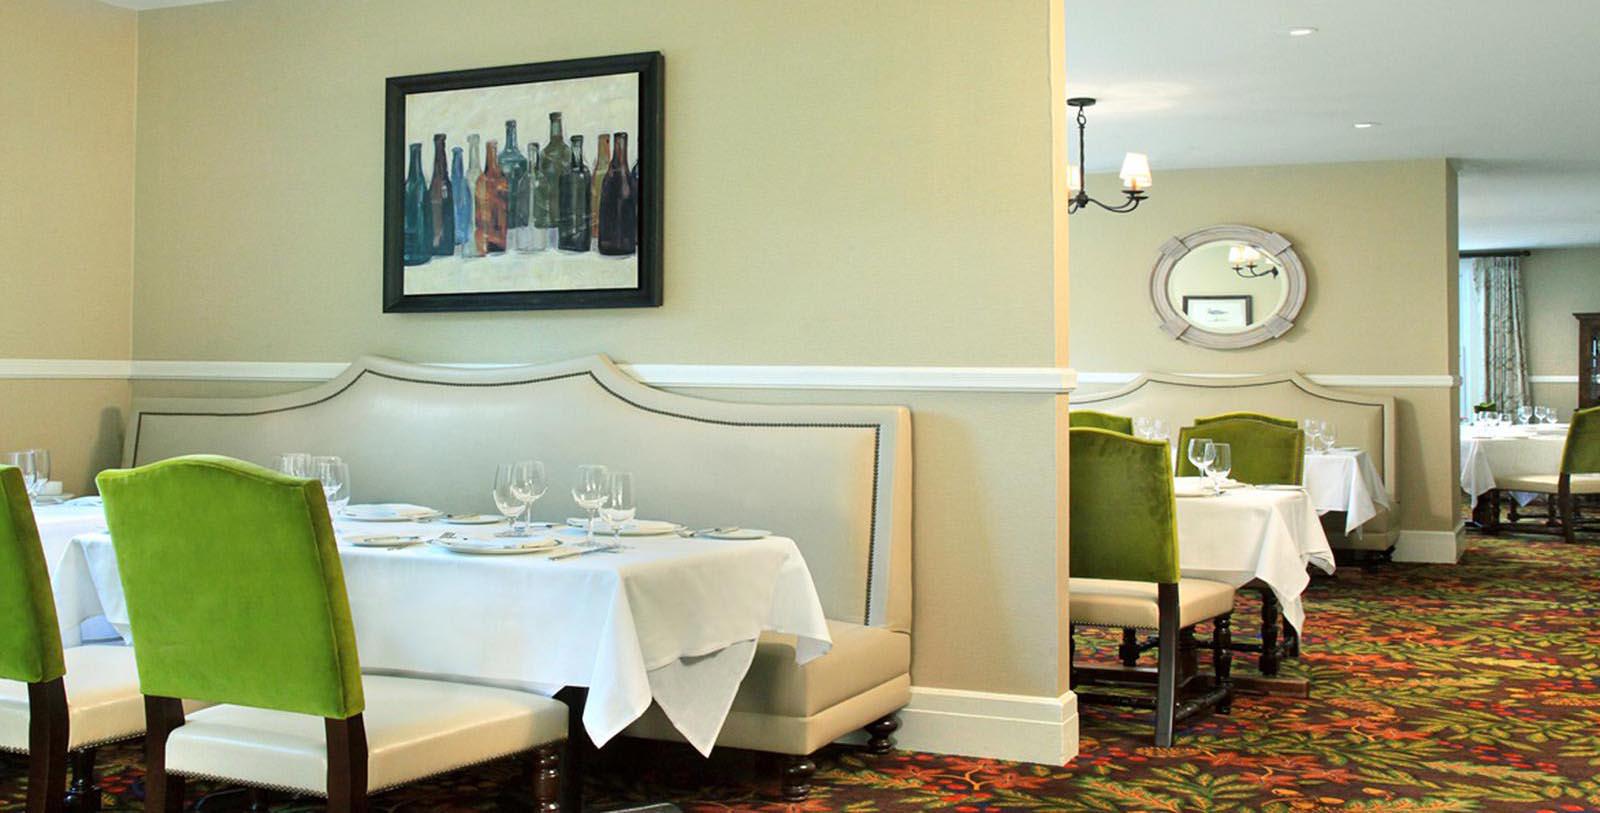 Taste authentic regional gourmet dining at The Bretton Arms Dining Room.